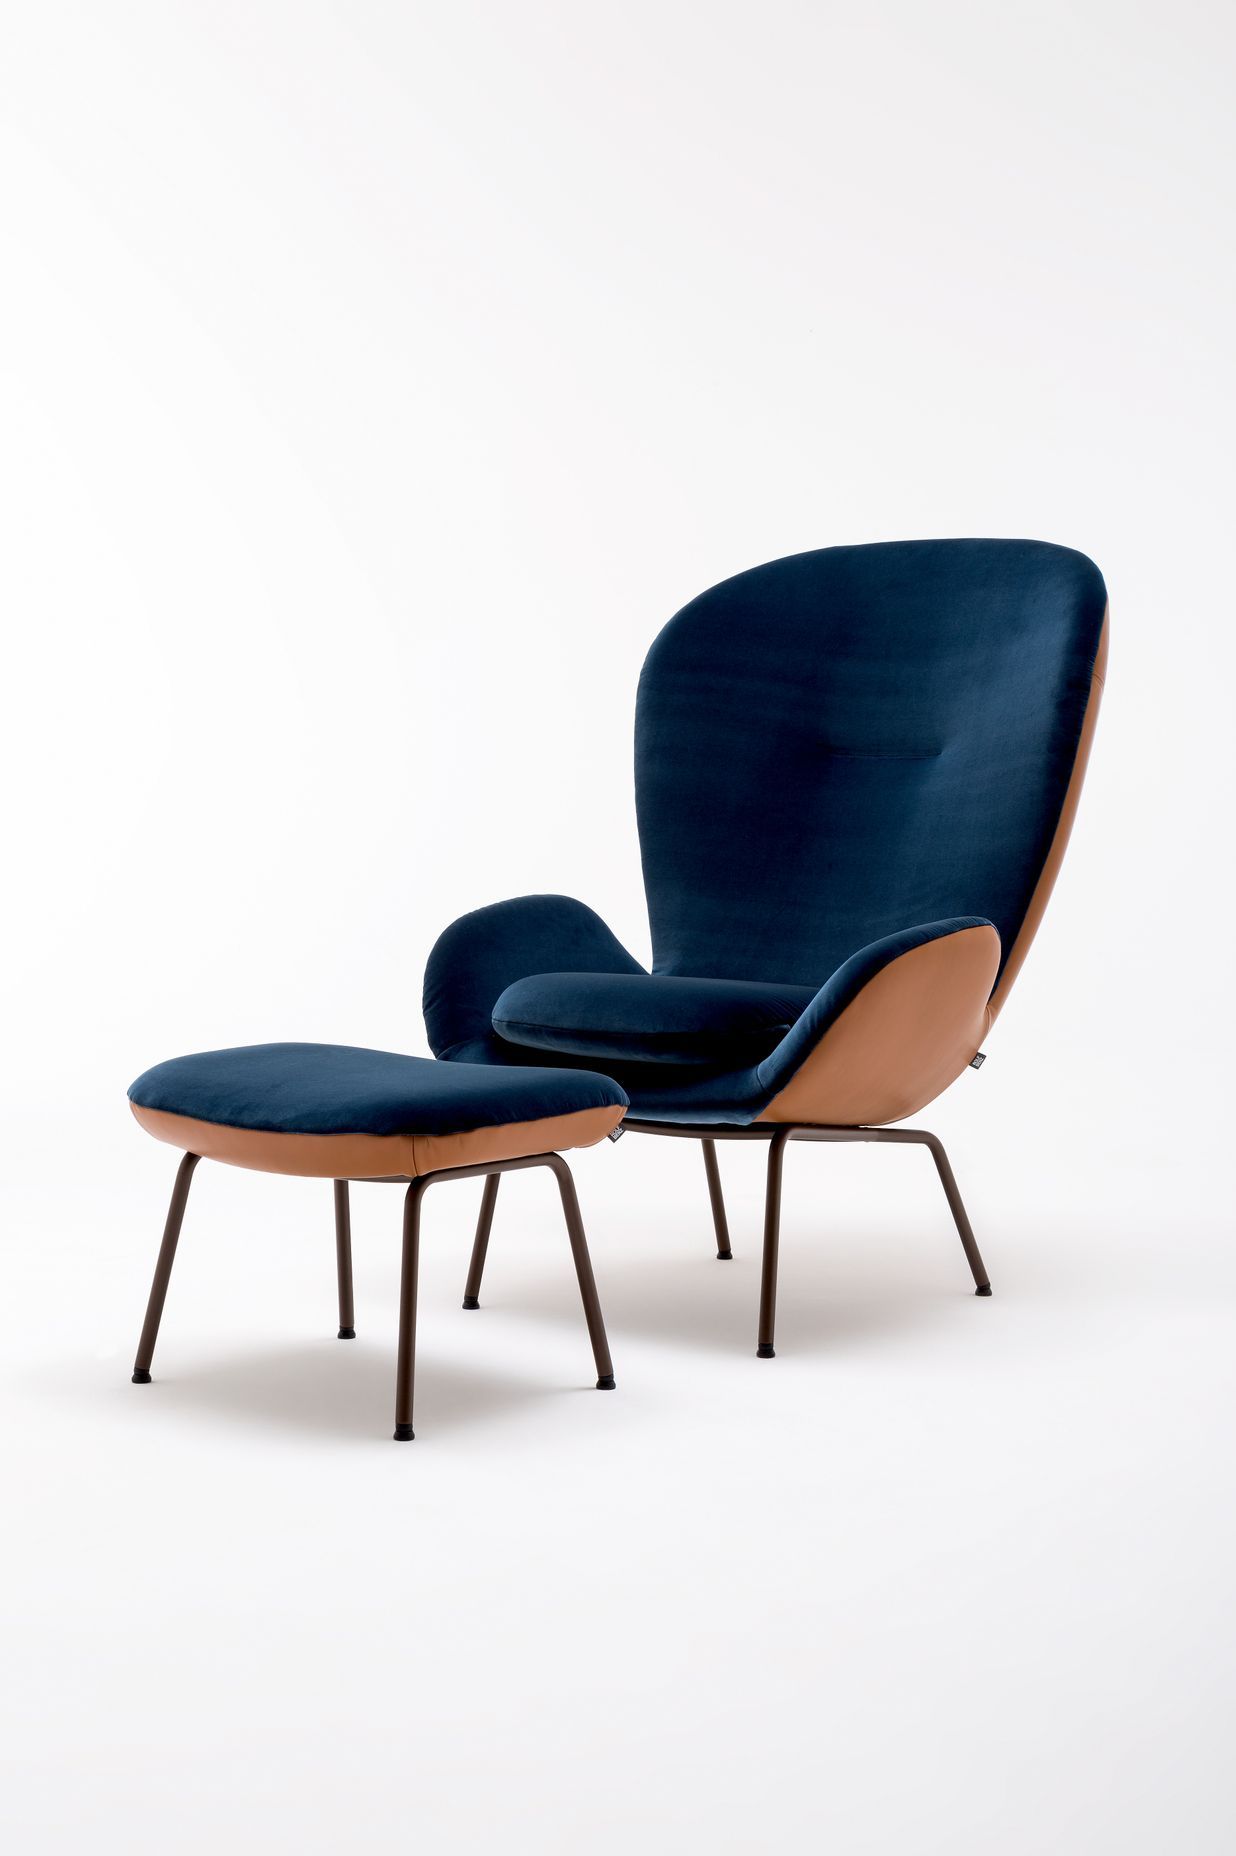 The Rolf Benz 594 high-back armchair is an eye-catching statement whose soft lines offer a visual clue to its particularly soft, light upholstery, while its finely balanced back curve embraces its occupant.